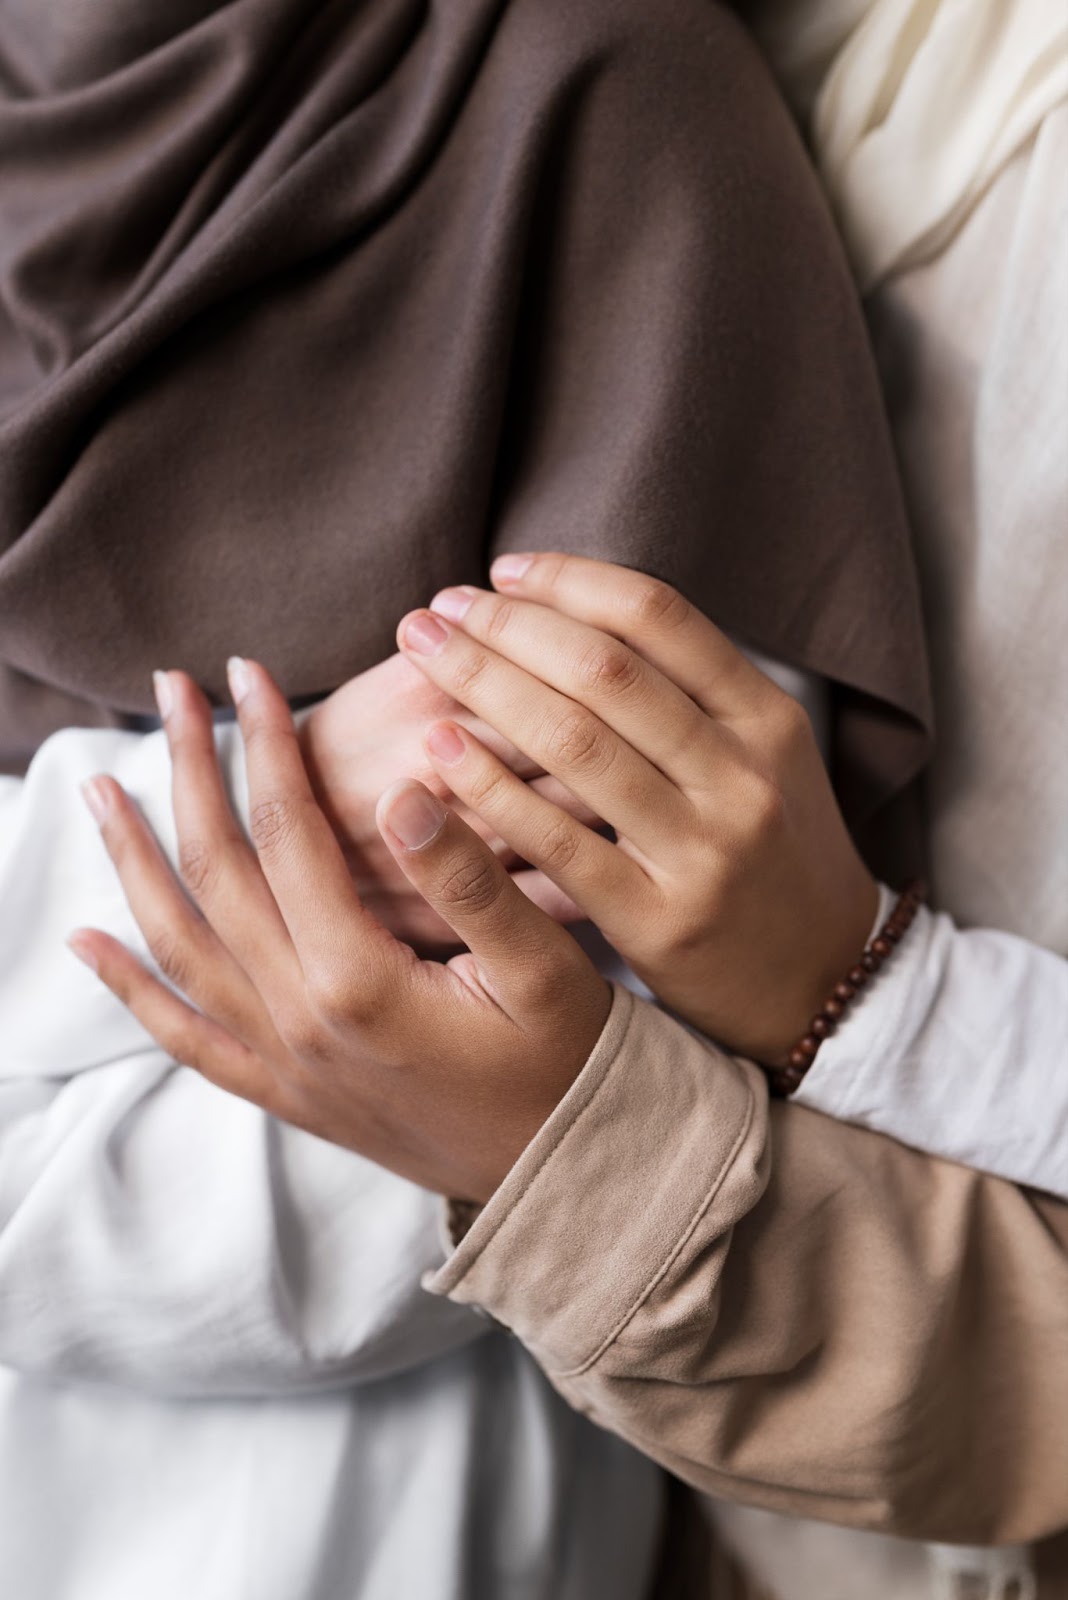 Women in hijab holding hands